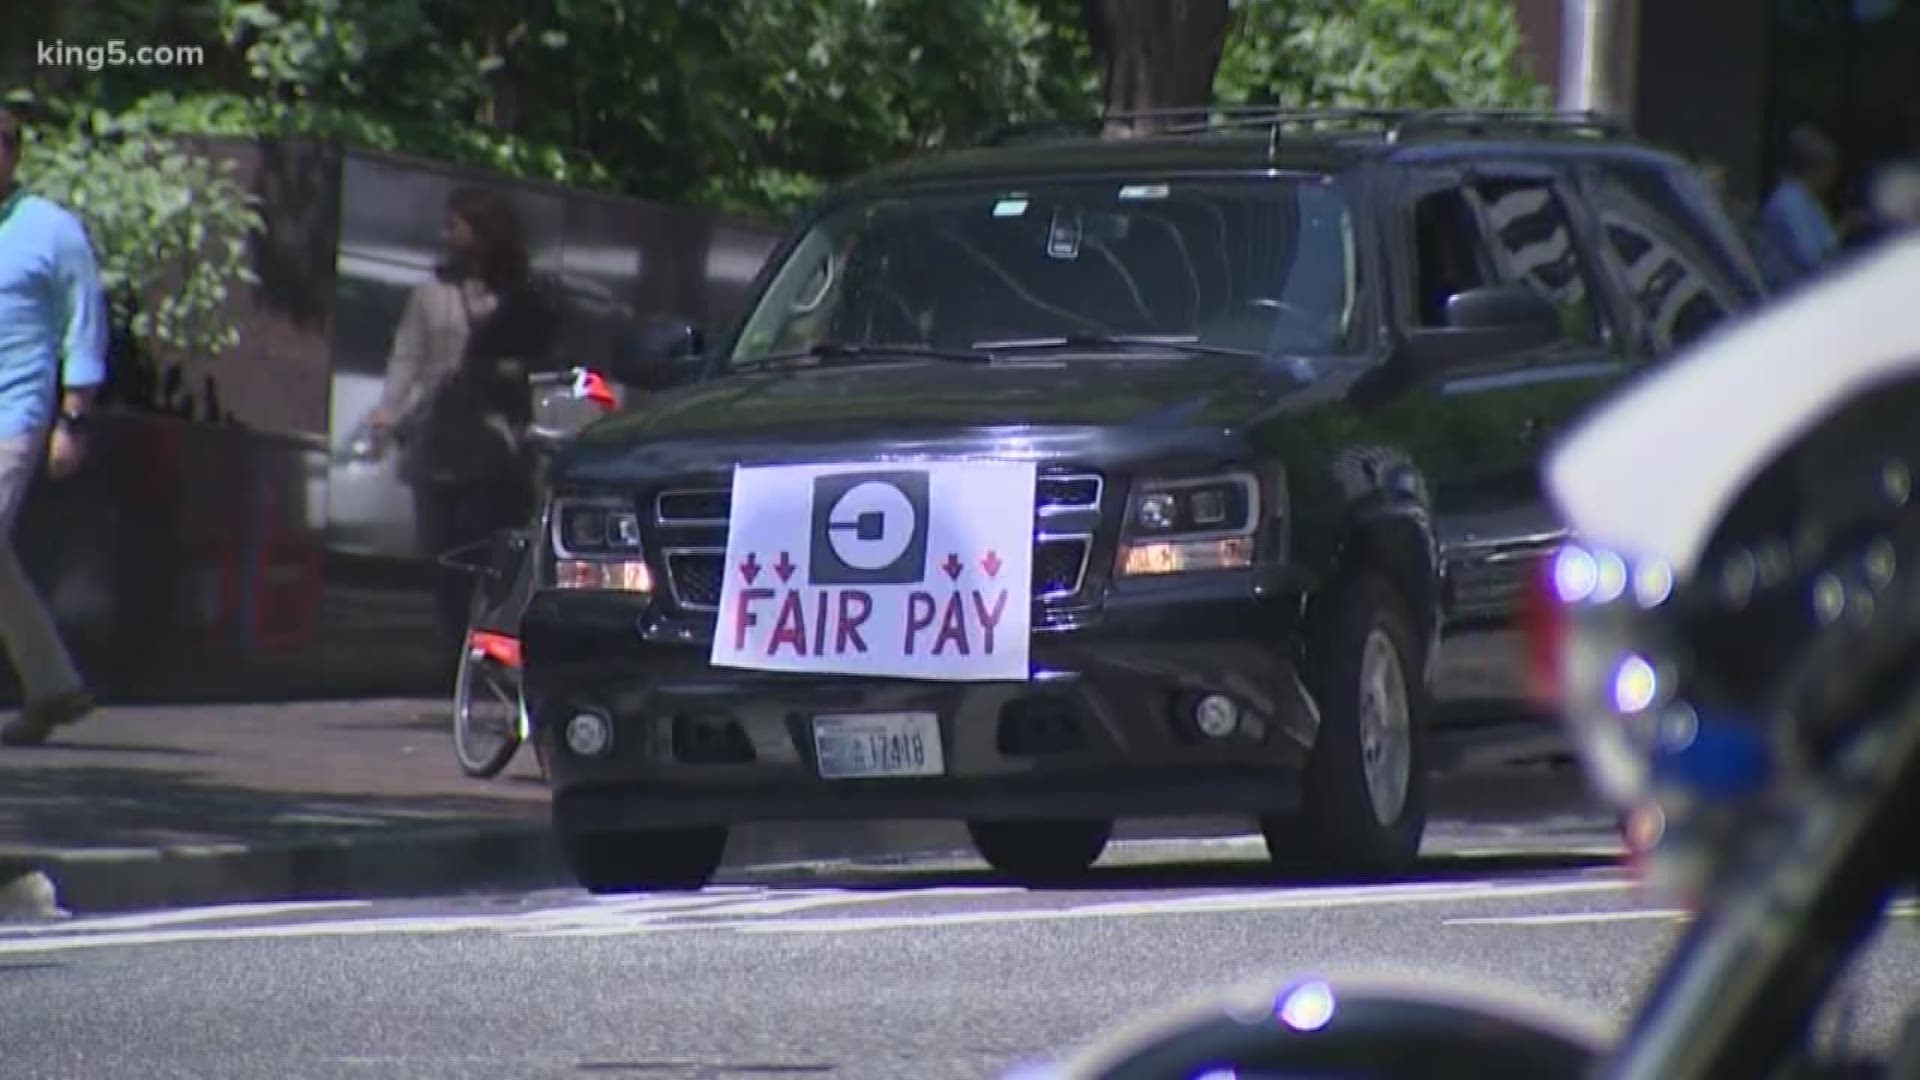 Dozens of Uber and Lyft drivers formed a parade through the city, in what they say is a protest over declining wages. The spectacle was supported by multiple members of the Seattle City Council. KING 5's Chris Daniels reports.